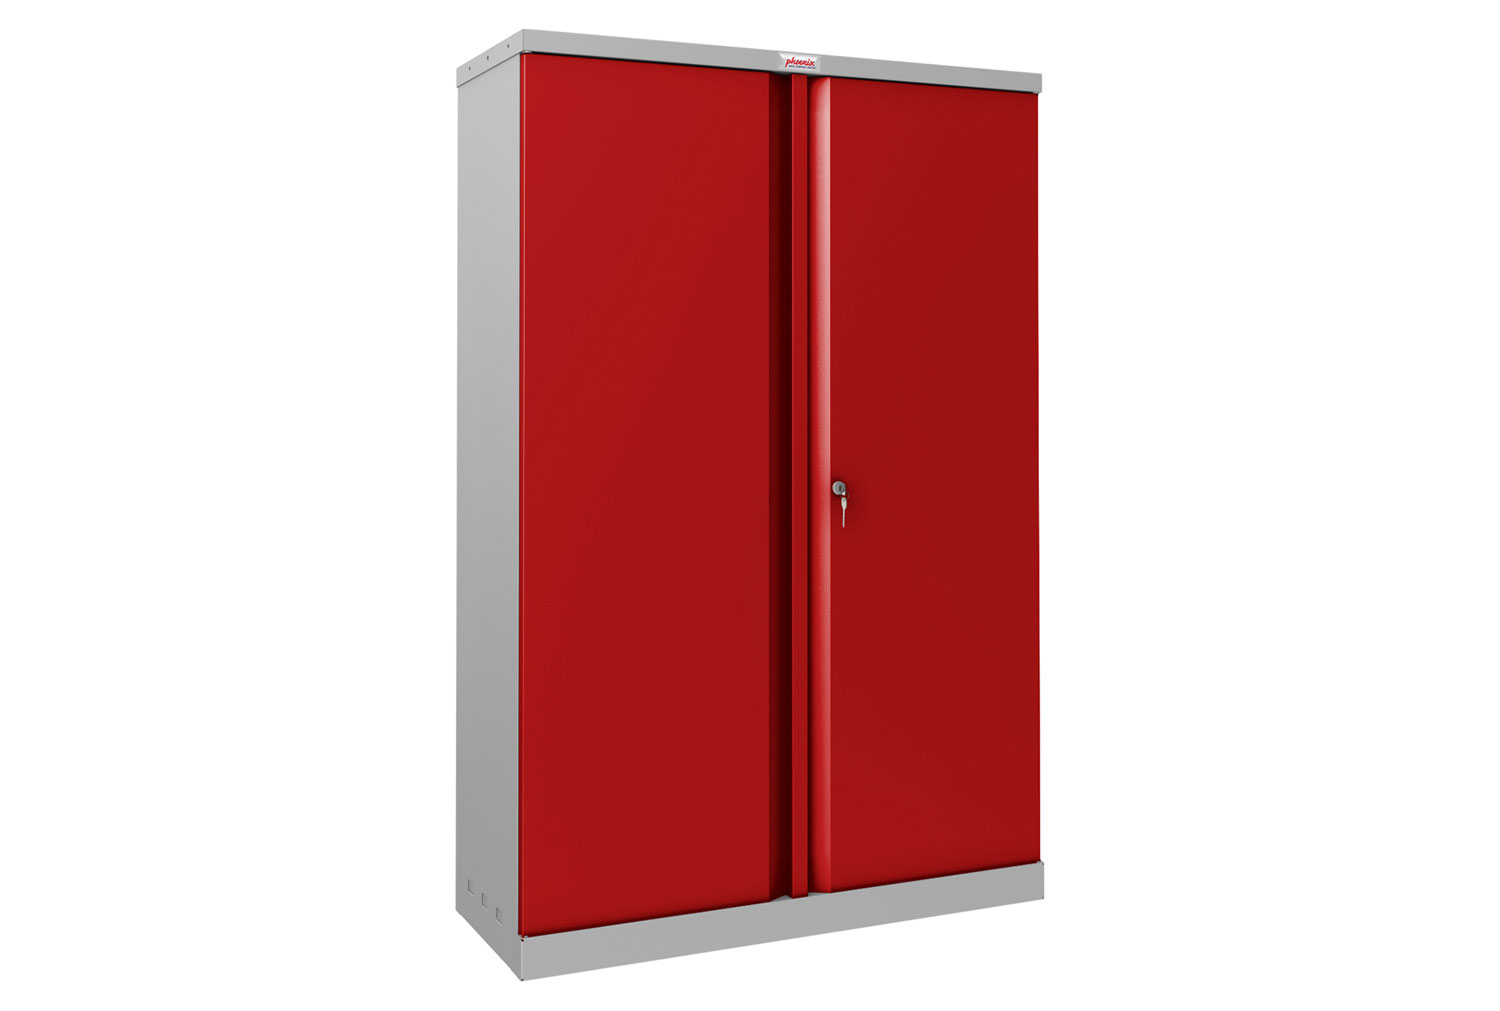 Phoenix SCL Steel Storage Office Cupboards With Key Lock, 3 Shelf - 92wx37dx140h (cm), Red, Express Delivery